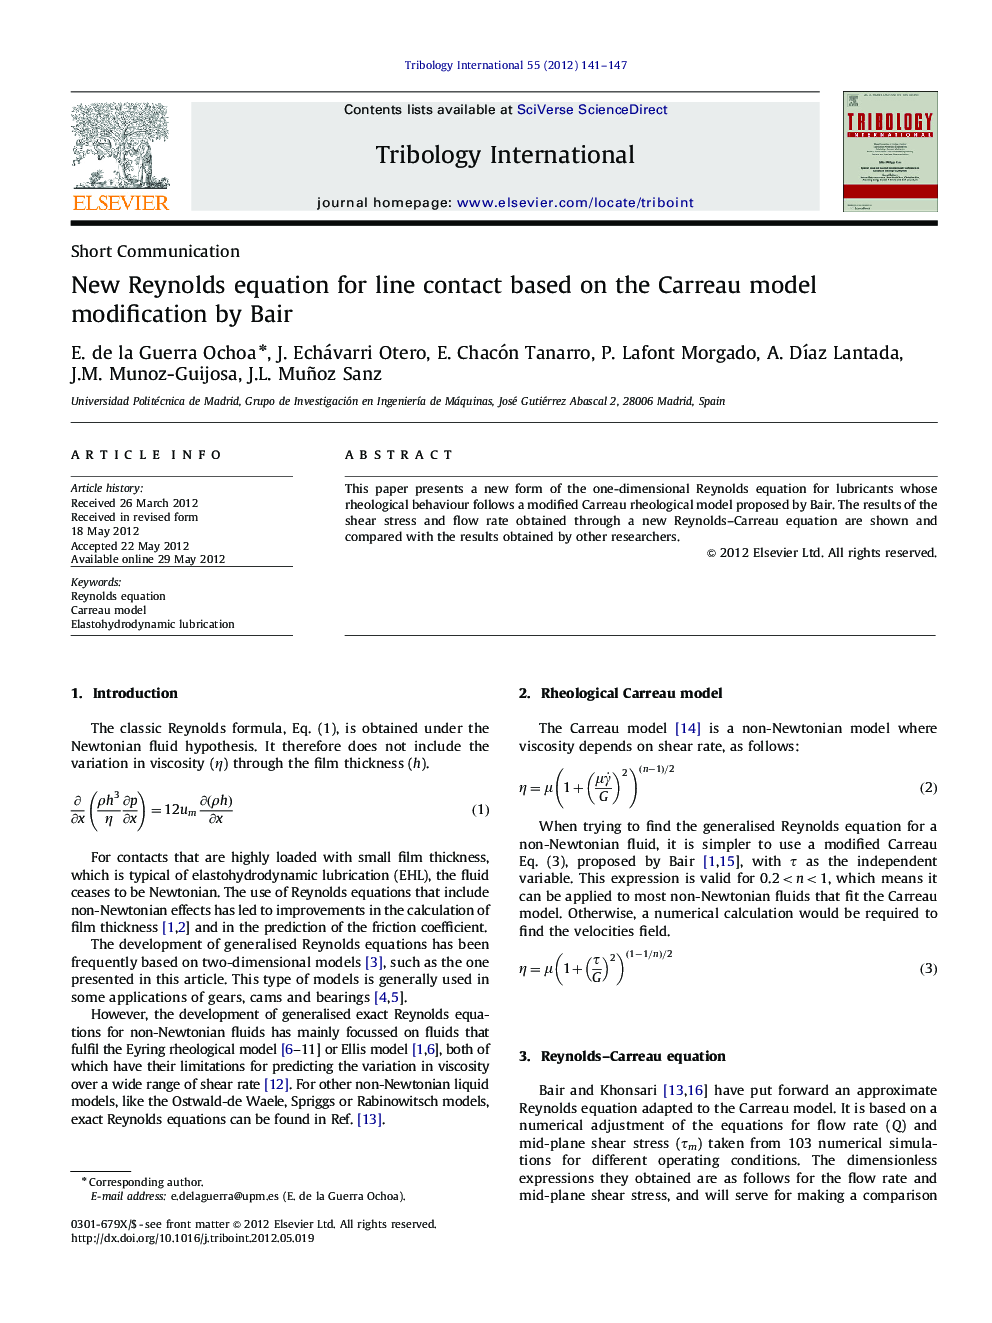 New Reynolds equation for line contact based on the Carreau model modification by Bair